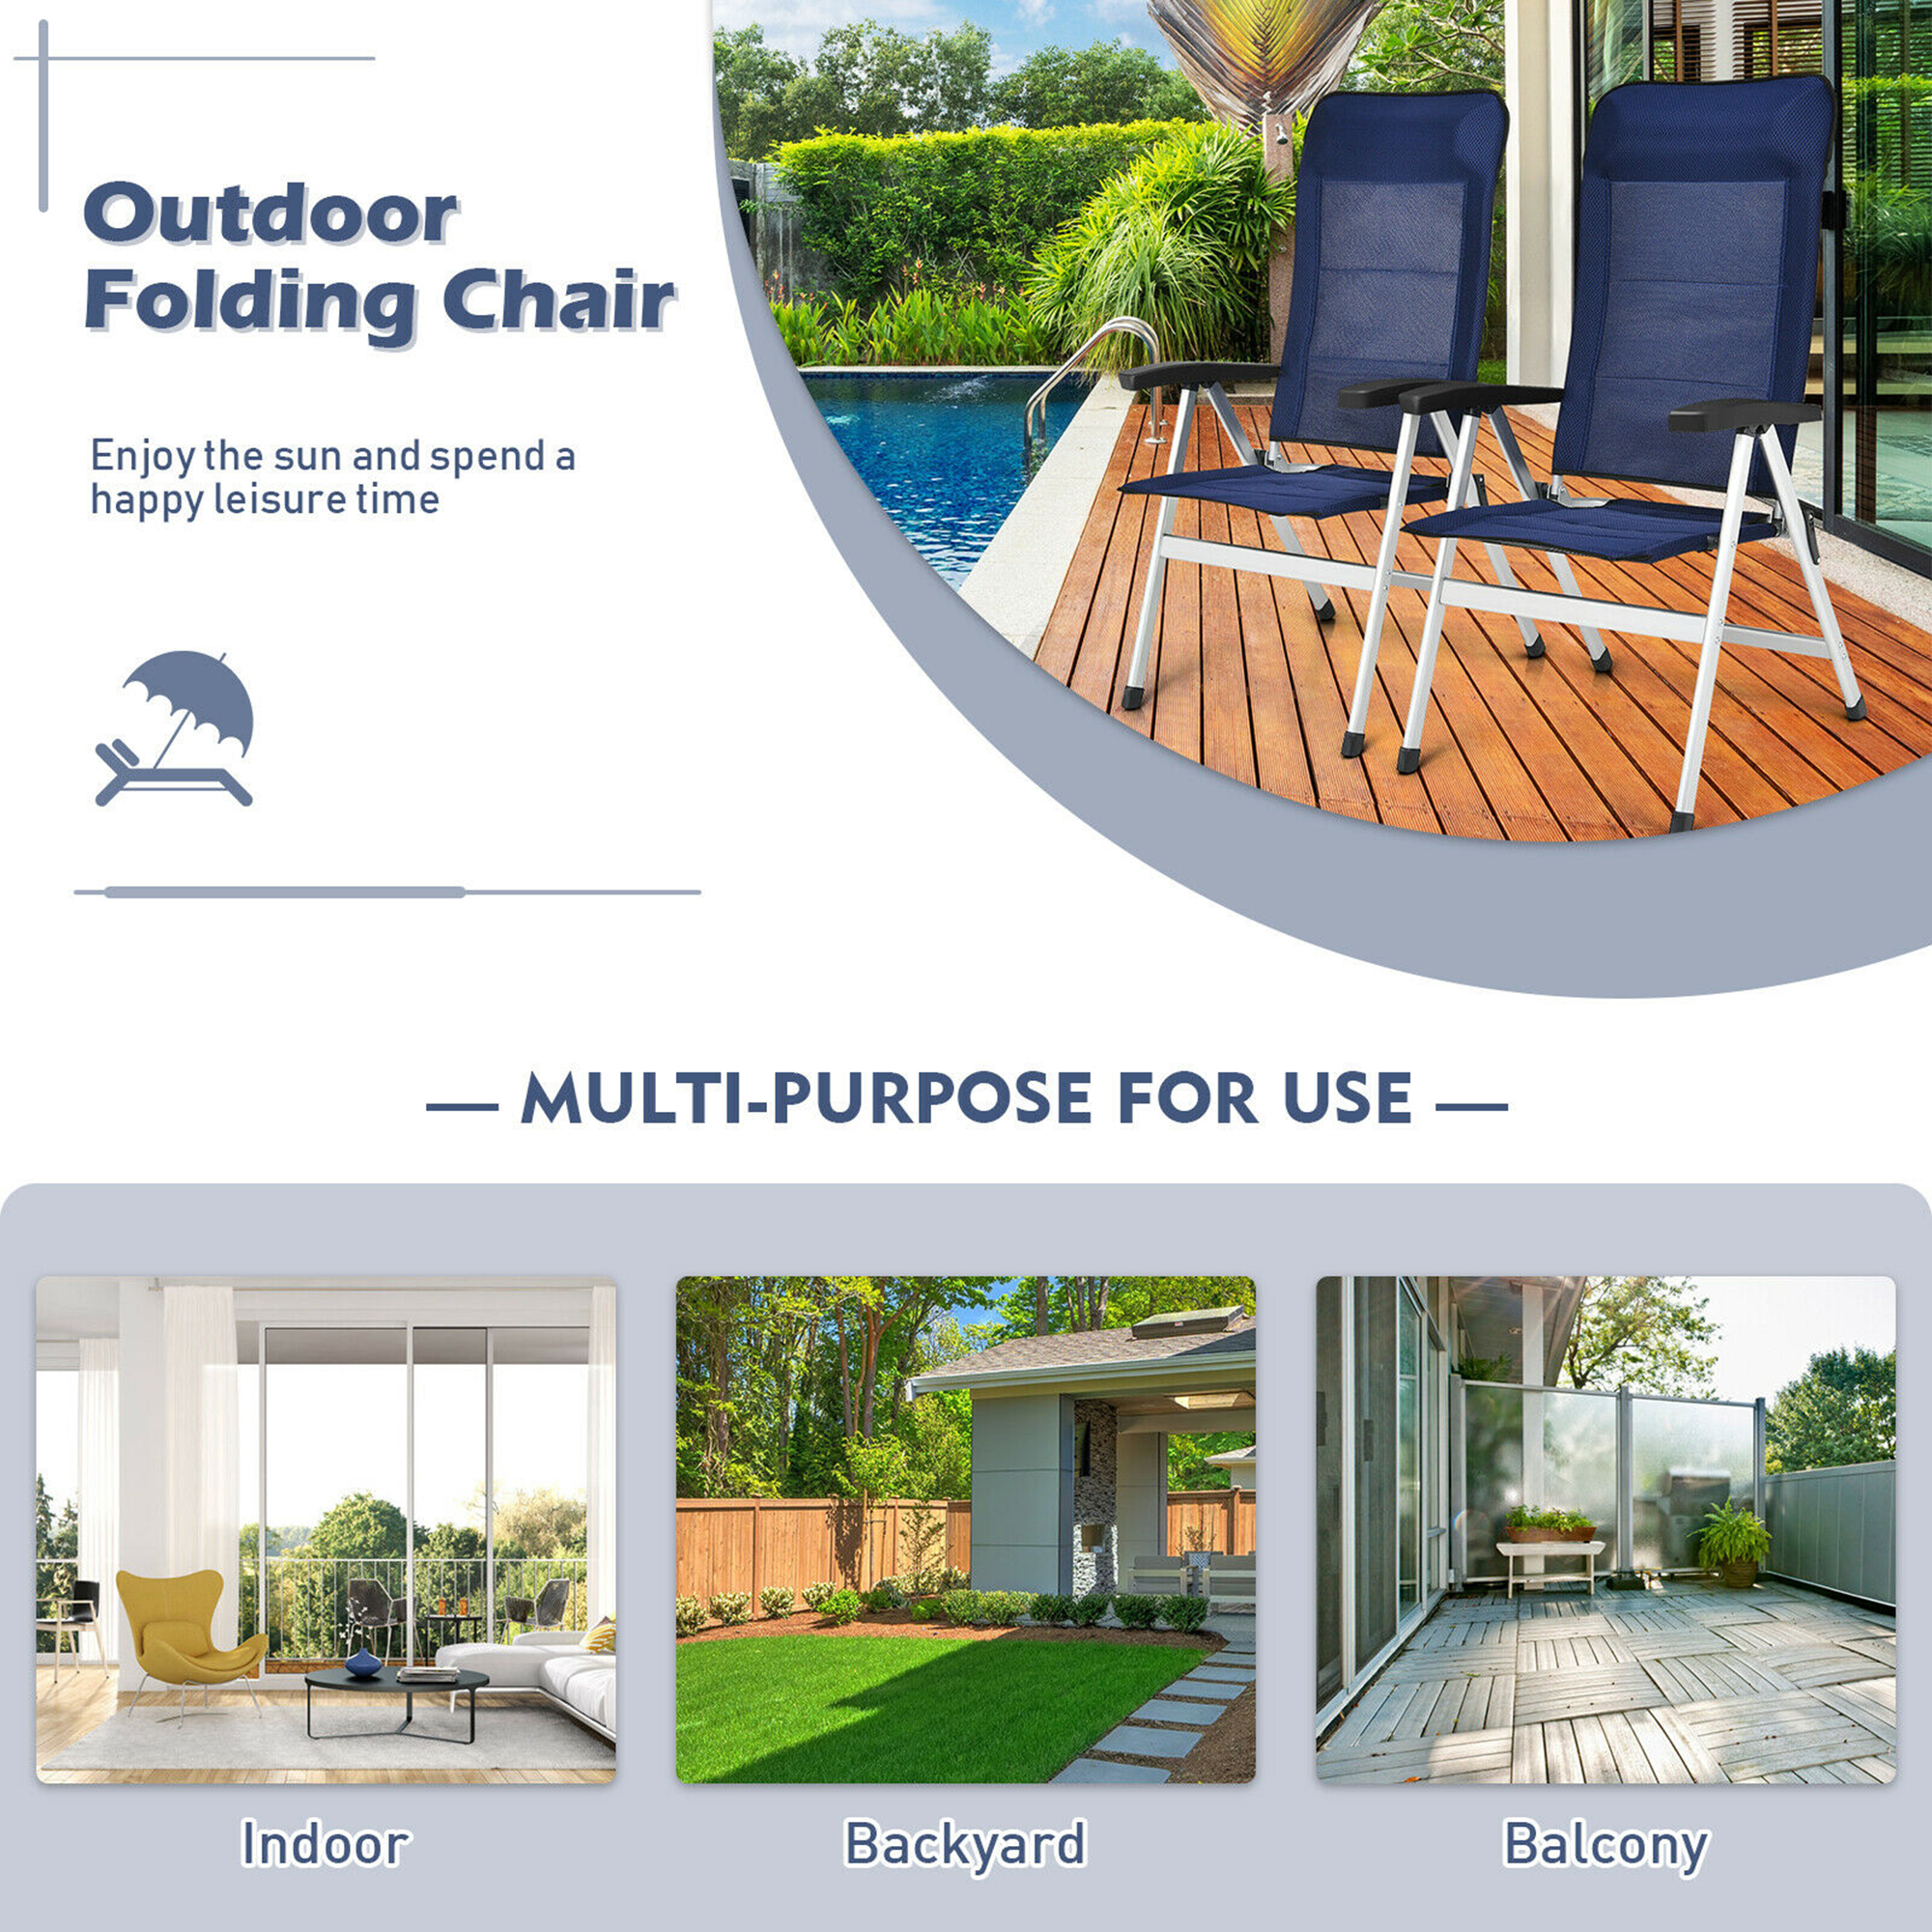 Costway 2PCS Patio Dining Chair Aluminum Camping Adjust Portable Headrest Navy - image 5 of 10